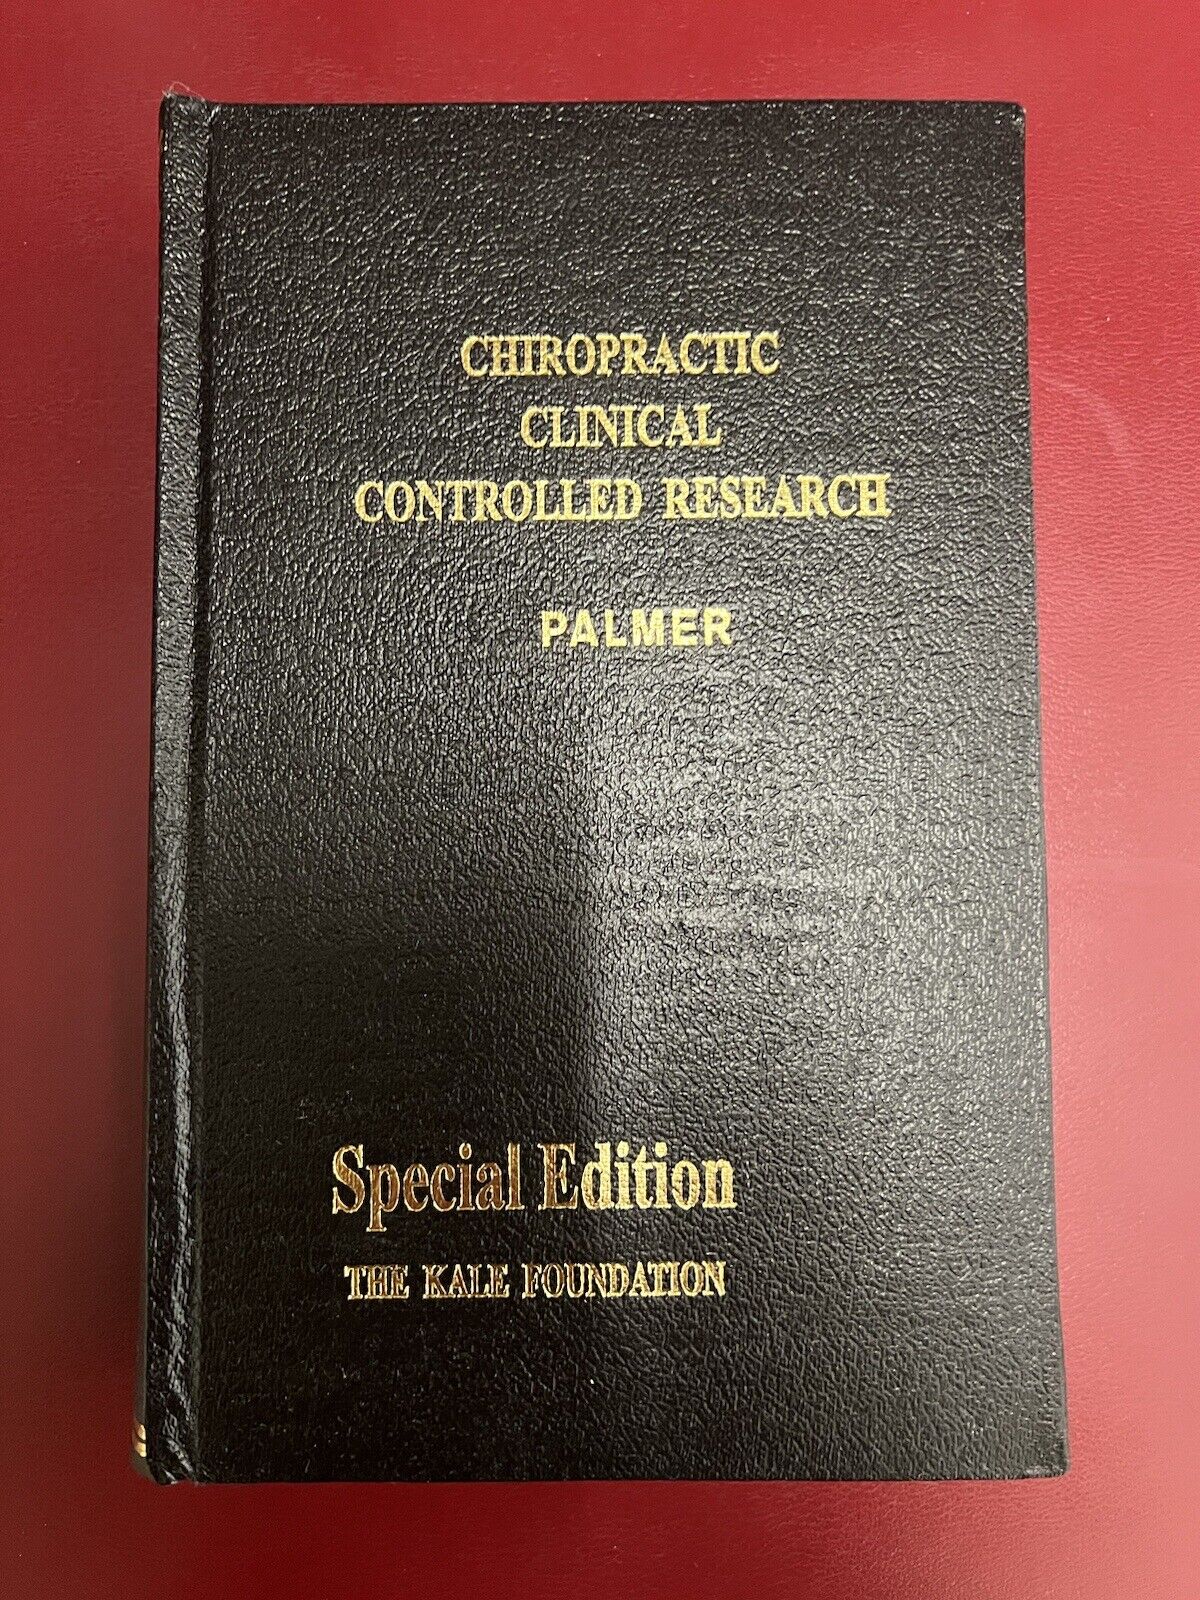 Chiropractic Clinical Controlled Research BJ Palmer Vol 25 Kale Special Edition